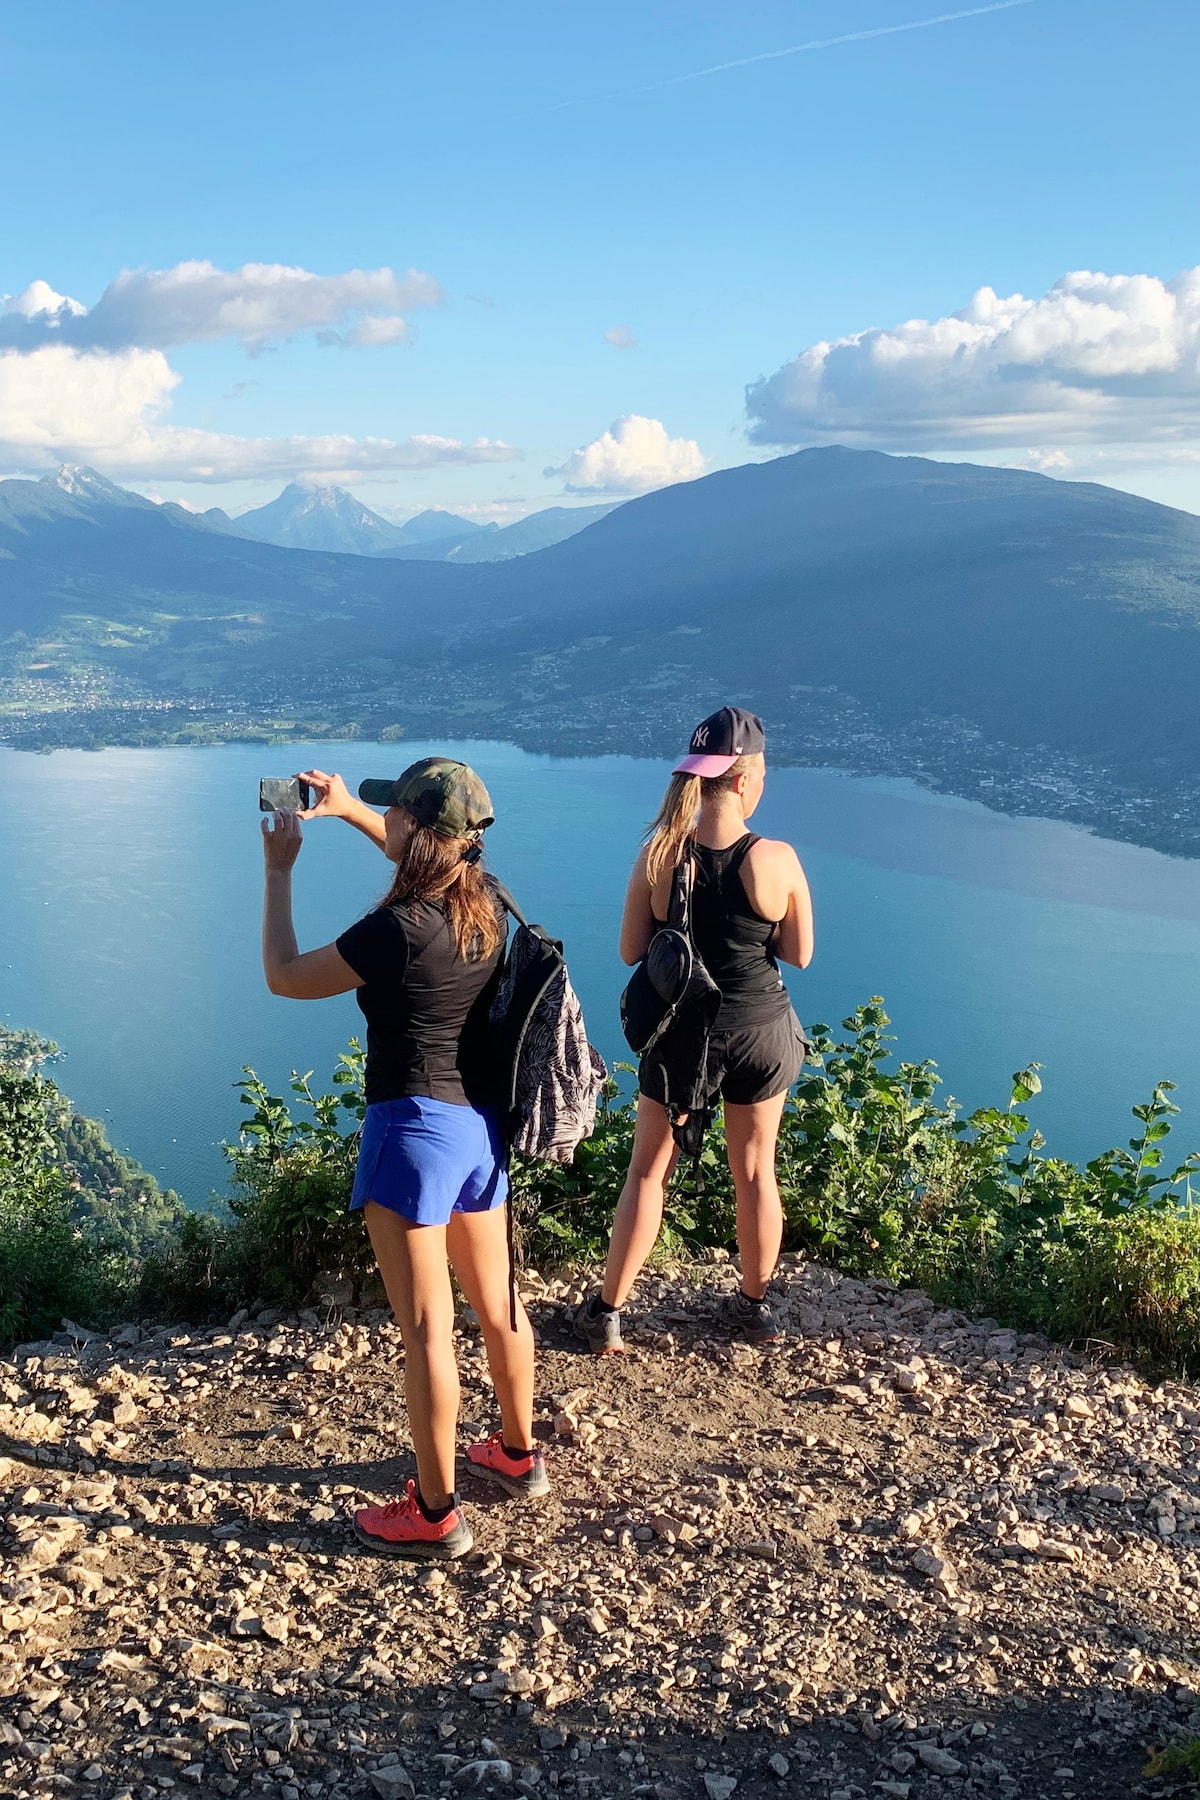 Best Things to Do in Savoie | Unique Tours & Activities - France | Airbnb